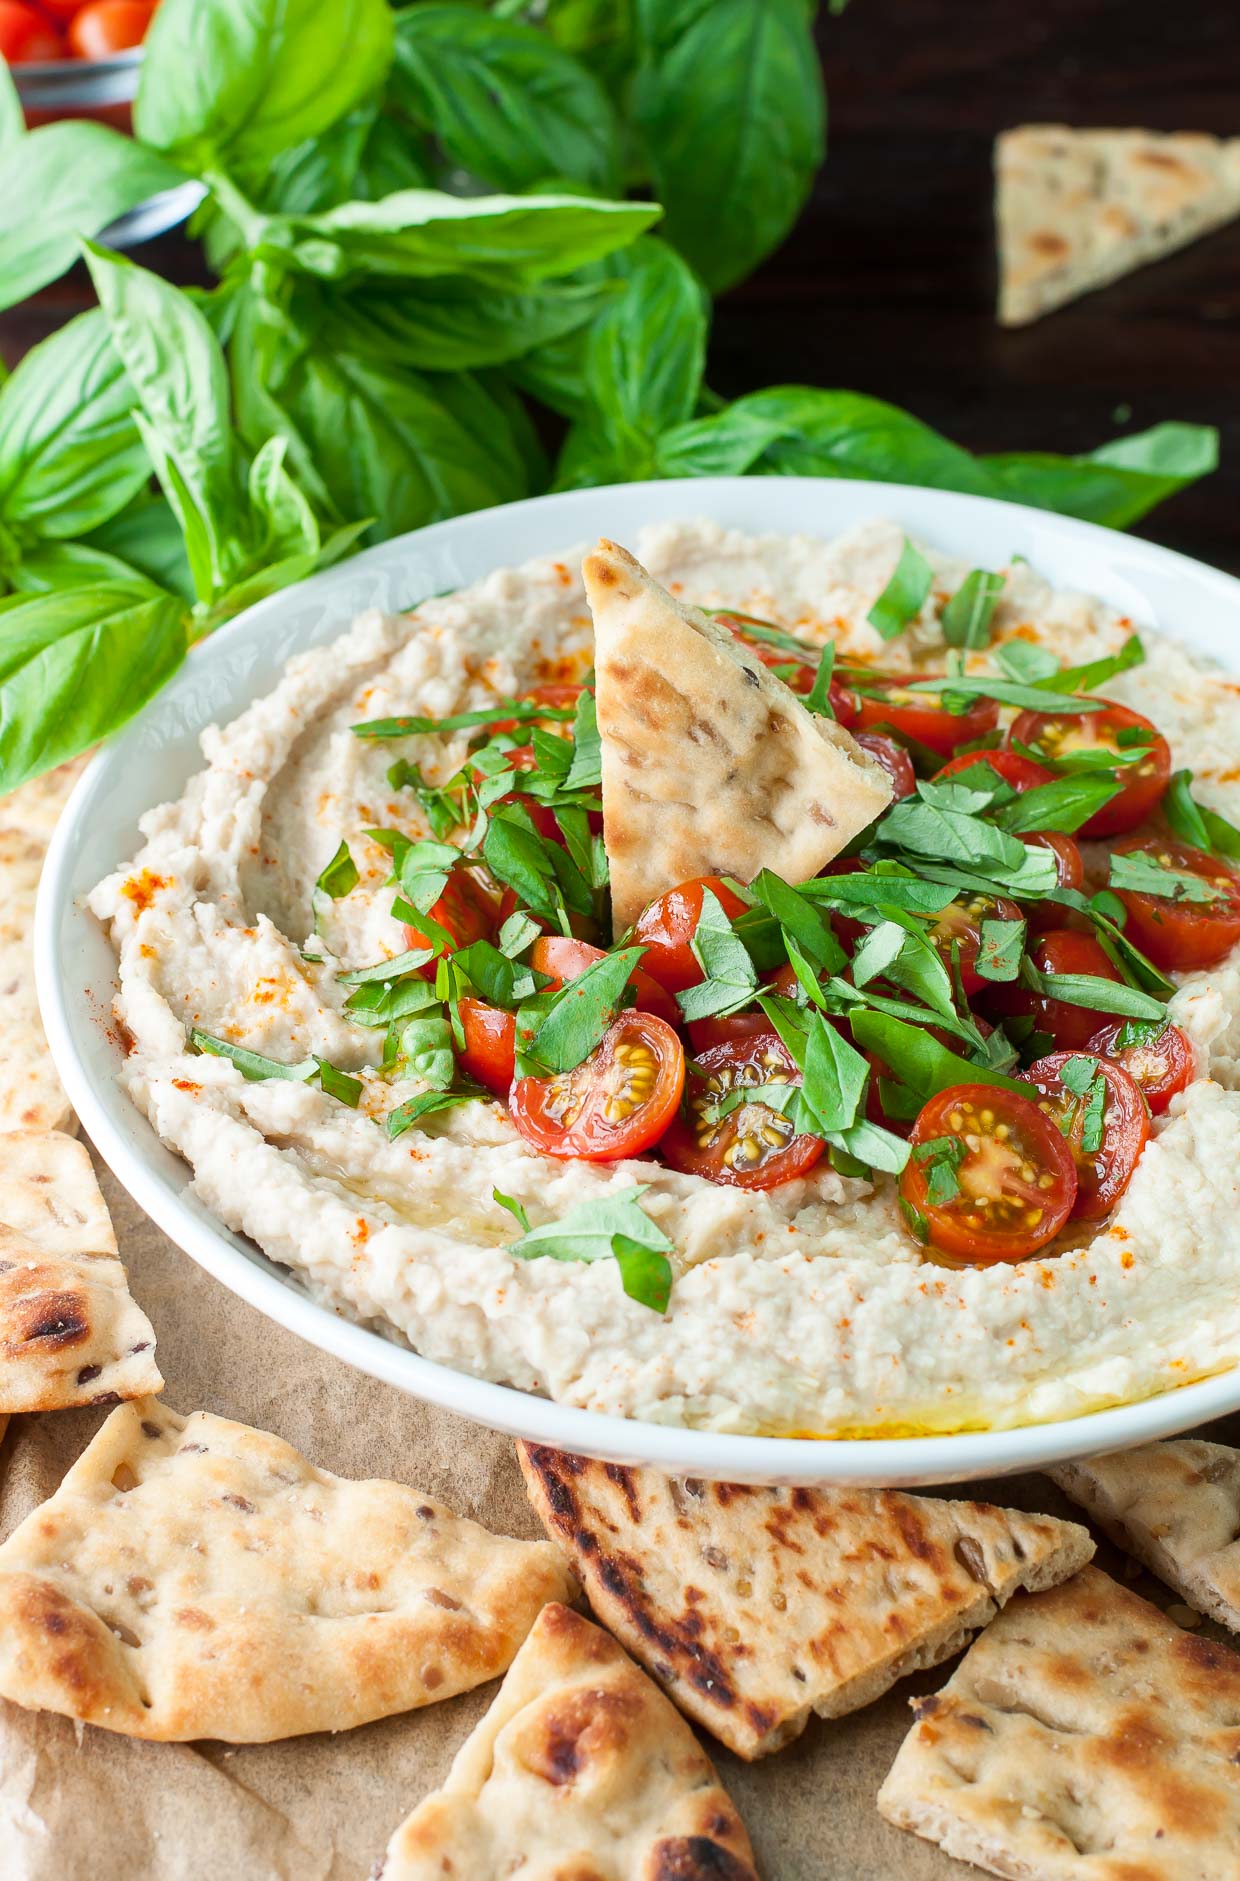 Tomato Basil White Bean Dip :: This easy breezy appetizer doubles as a healthy snack! It comes together in just minutes and can be made/prepped in advance too. Pop leftovers in the fridge for an extra snack sesh or two throughout the week.